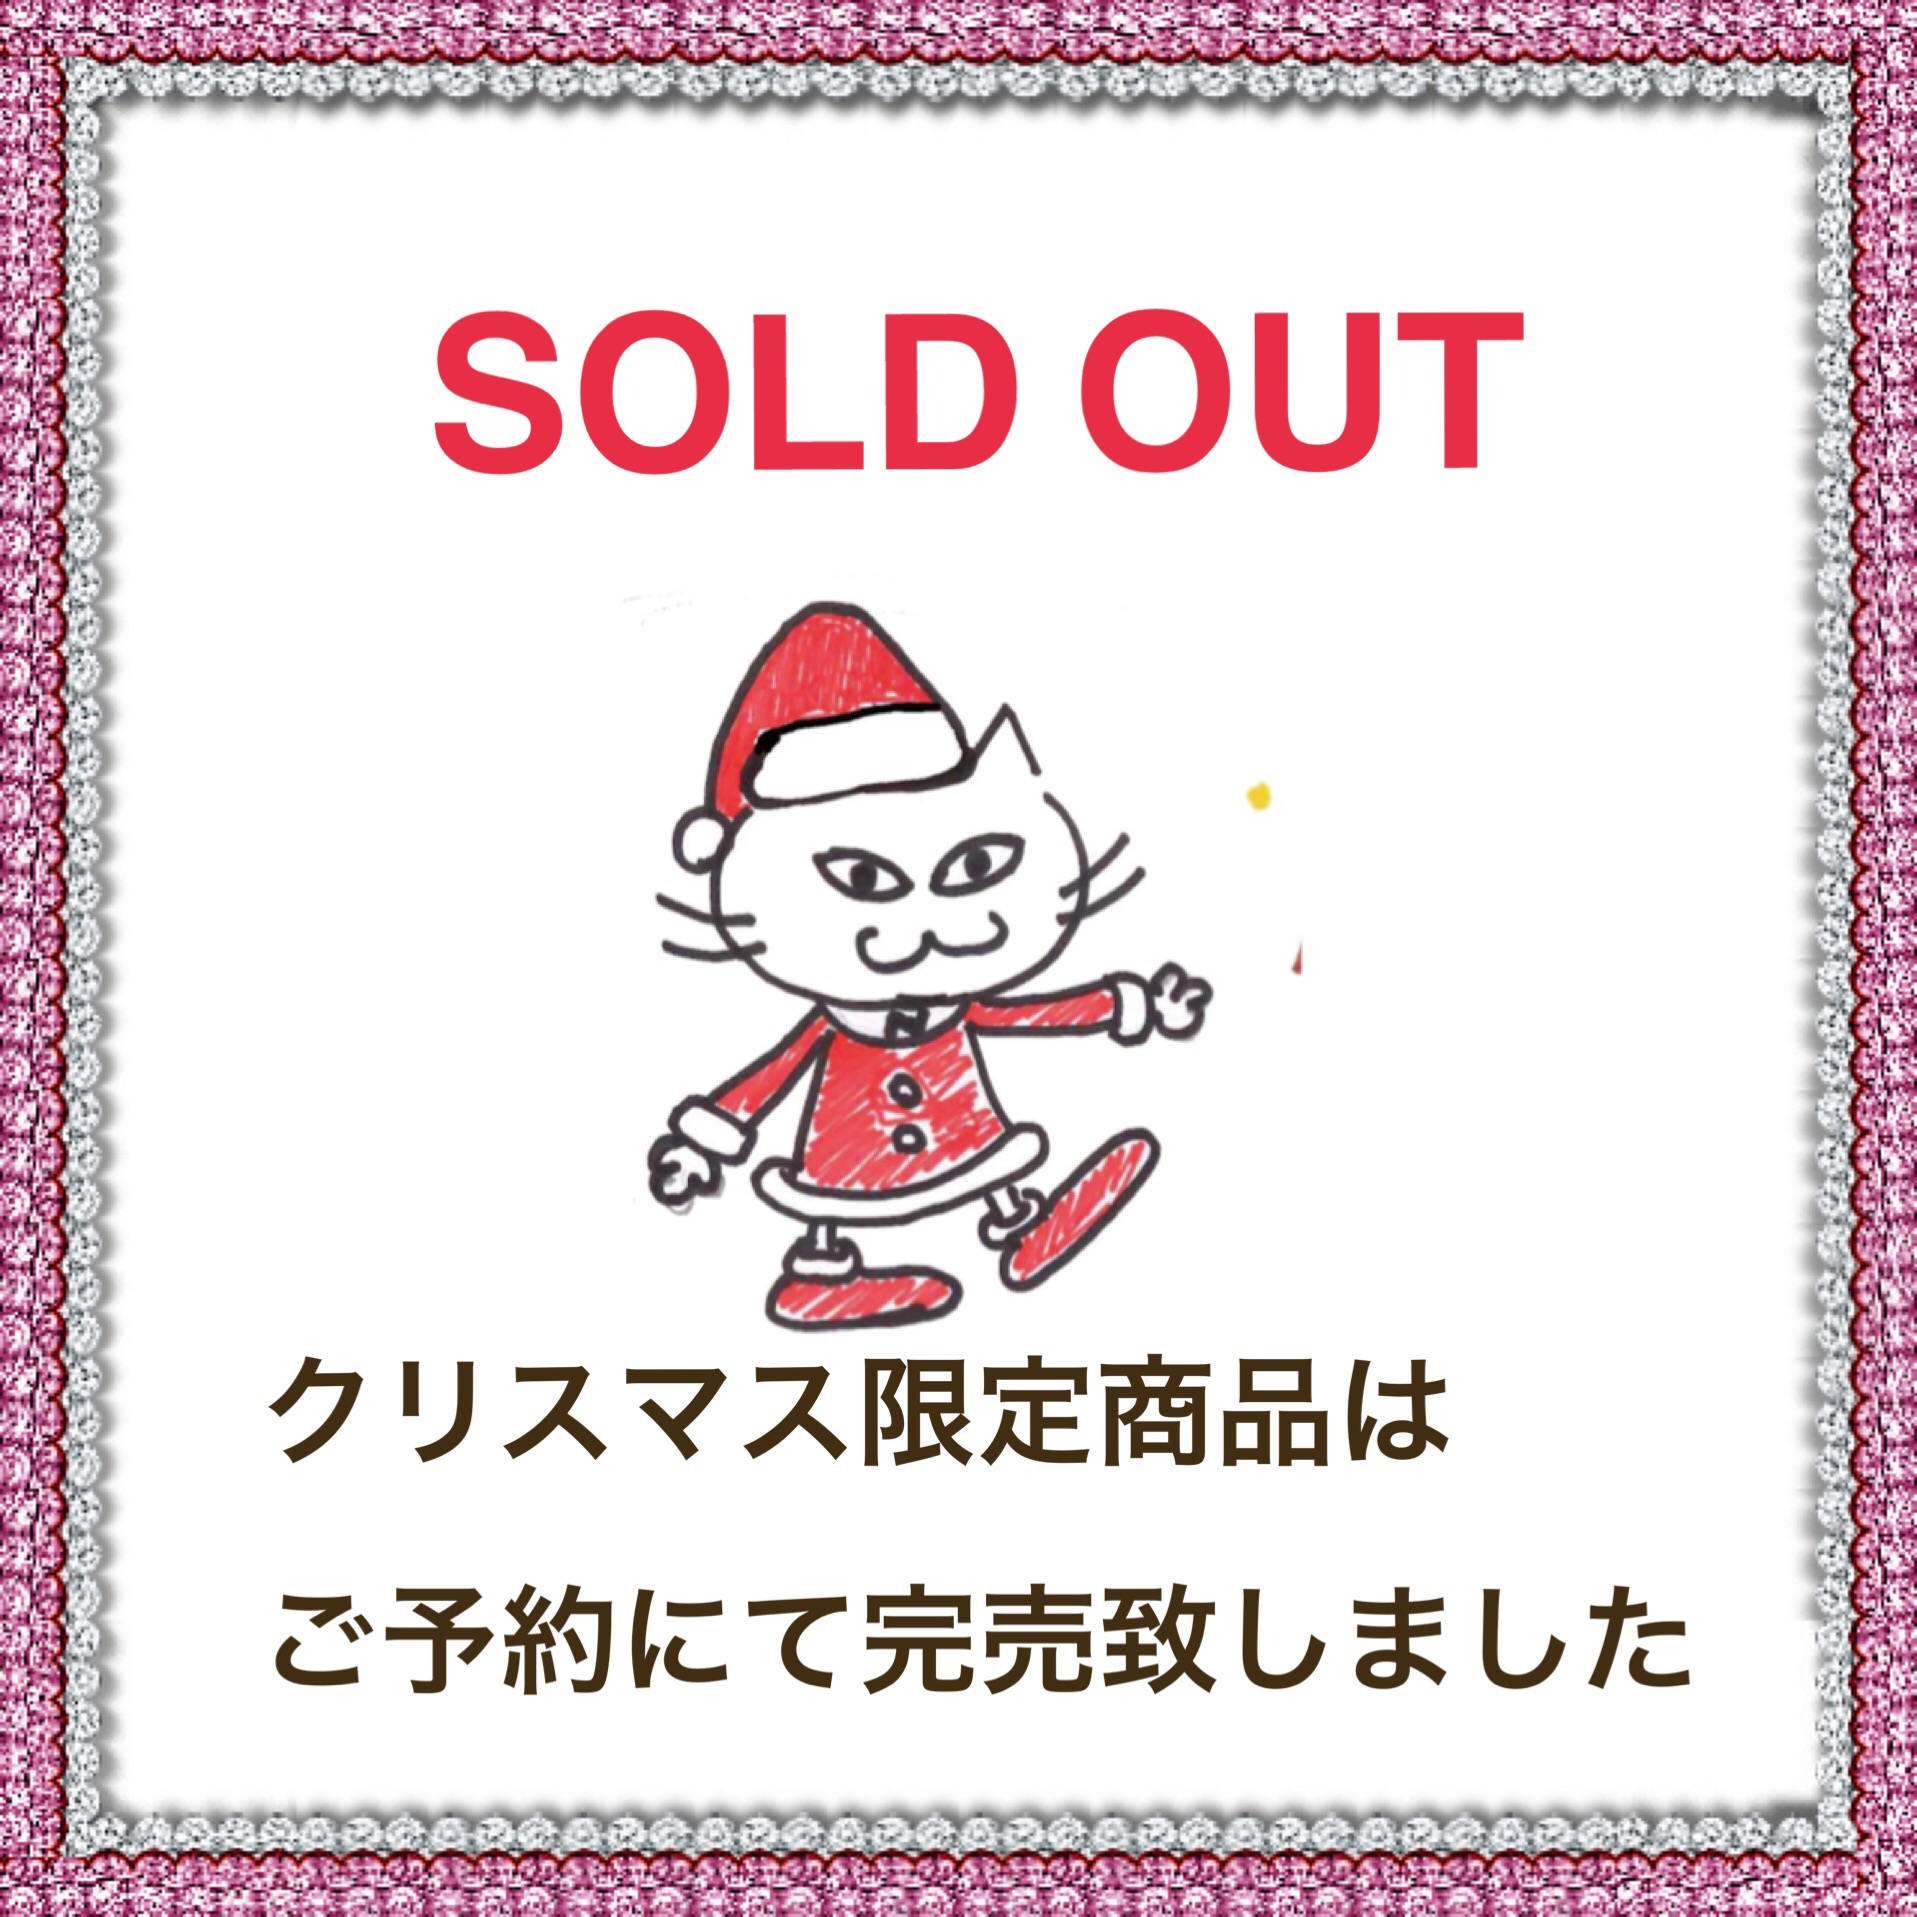 SOLD ご予約頂きました。